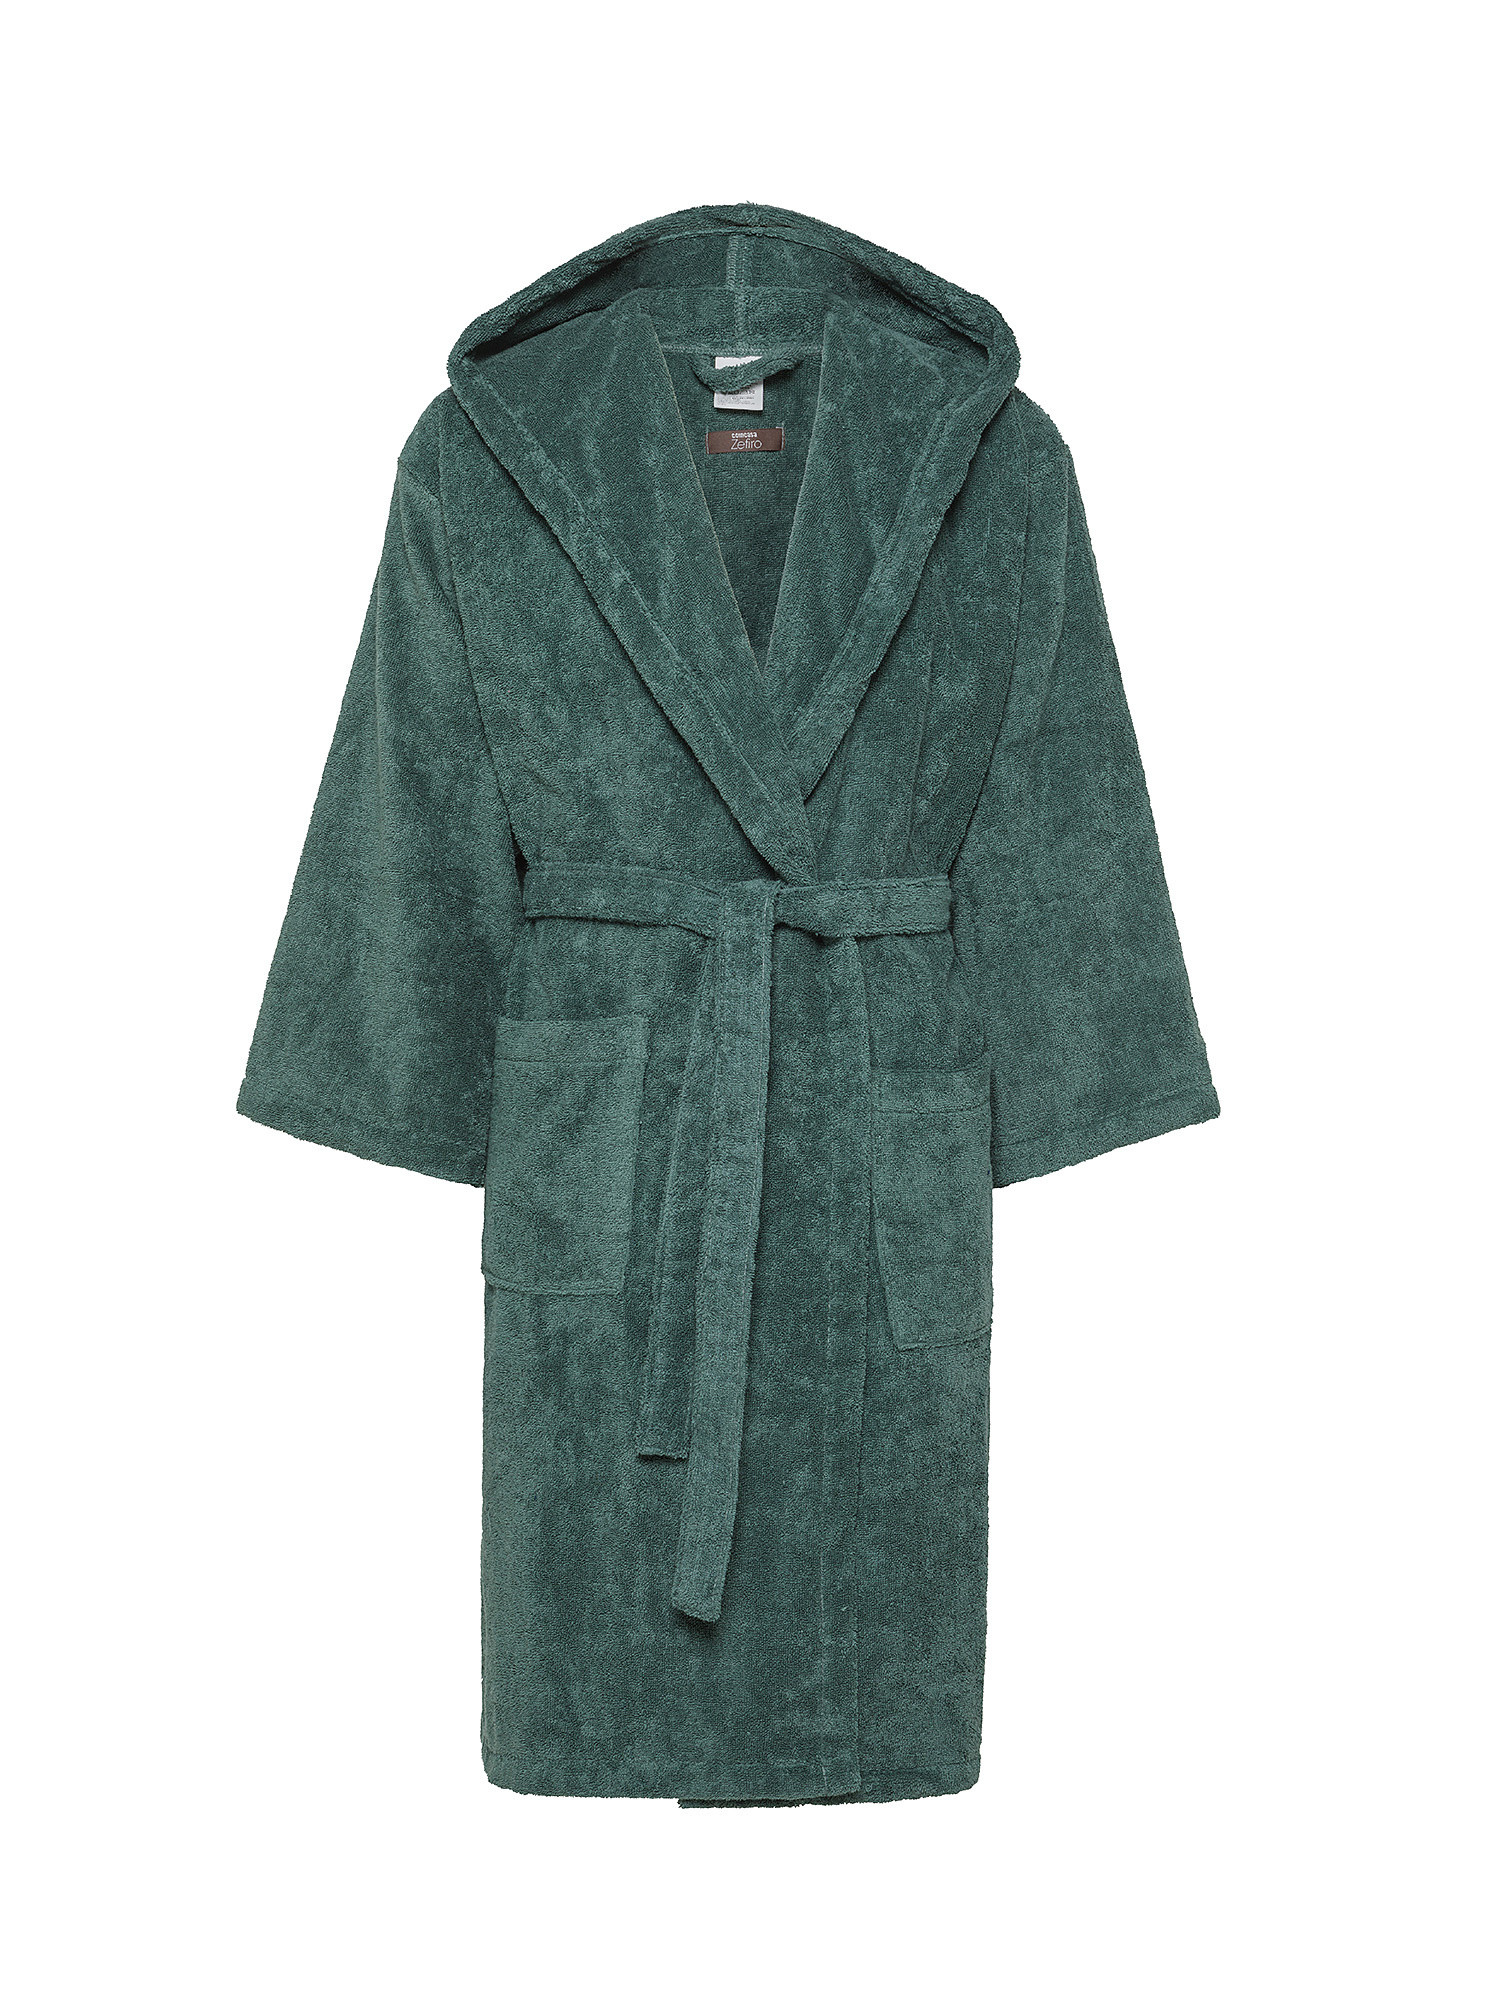 Zefiro solid color 100% cotton bathrobe, Light Green, large image number 0